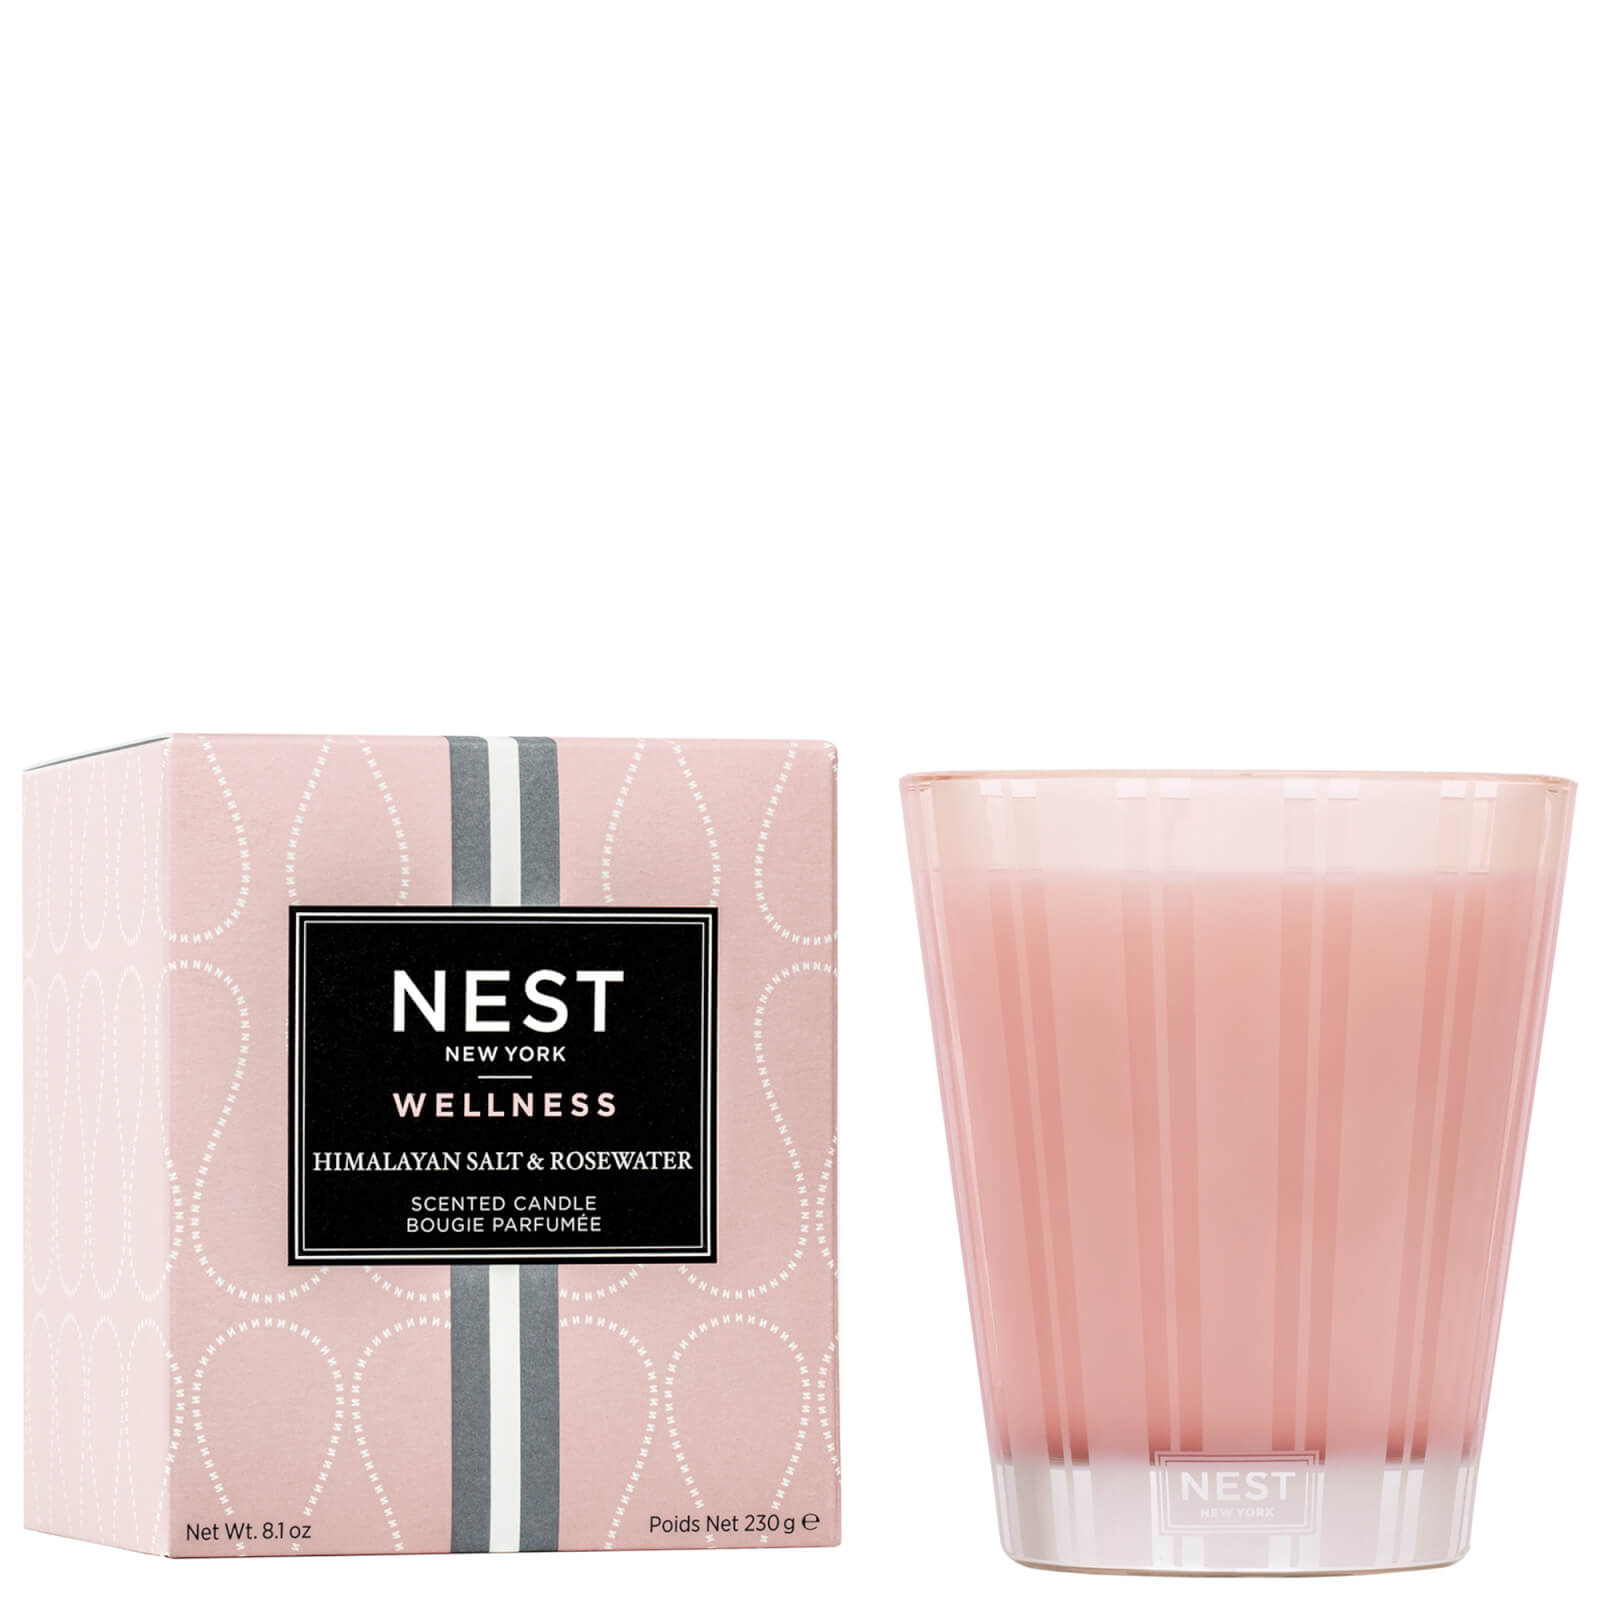 NEST NEW YORK NEST NEW YORK HIMALAYAN SALT AND ROSEWATER CLASSIC CANDLE 230G